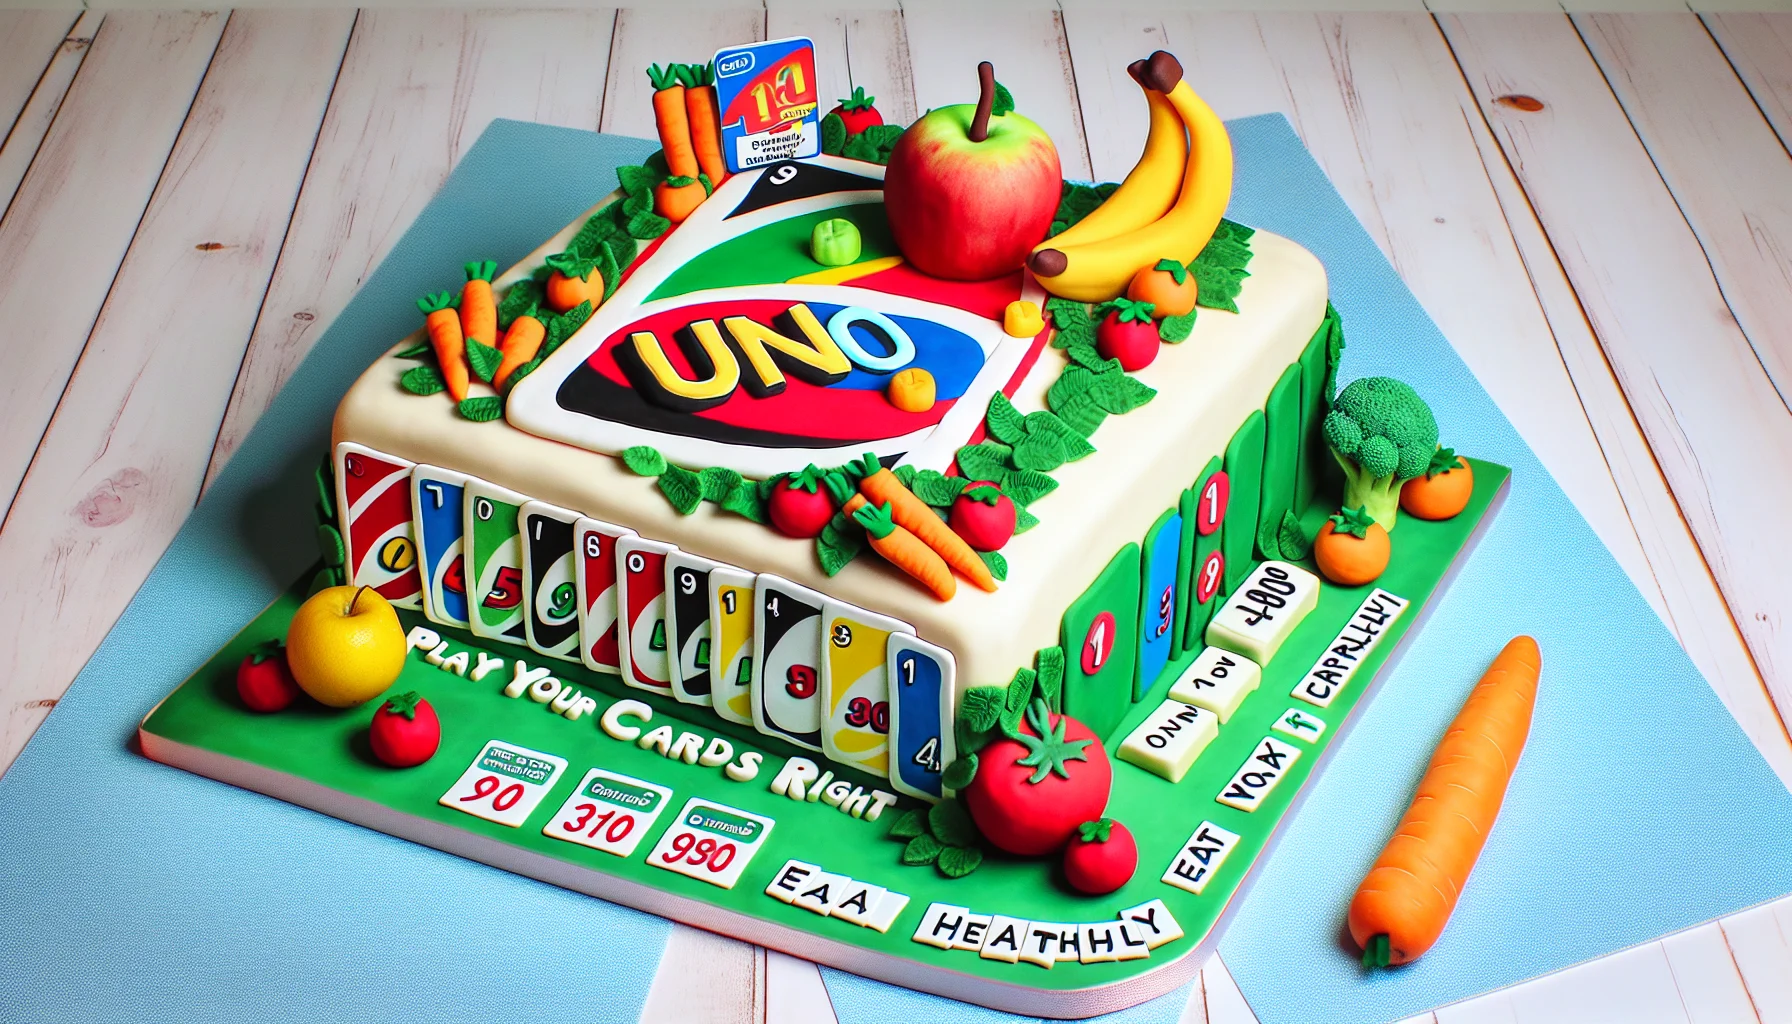 Create an image of a humorously decorated birthday cake, themed around the popular card game Uno. The cake is incredibly detailed, replicating the vibrant colors and symbols of Uno cards. In a playful twist, fruits and vegetables have been added to the decoration, a charming contrast to the typically sweet treat. Perhaps there are carrot replicas of Uno cards or an apple designed as the draw four wild card. Next to the cake is a catchy caption 'Play your cards right, eat healthily!' Moreover, there are price tags attached to the fruits and vegetables, surprisingly low, encouraging a healthy diet on a budget.